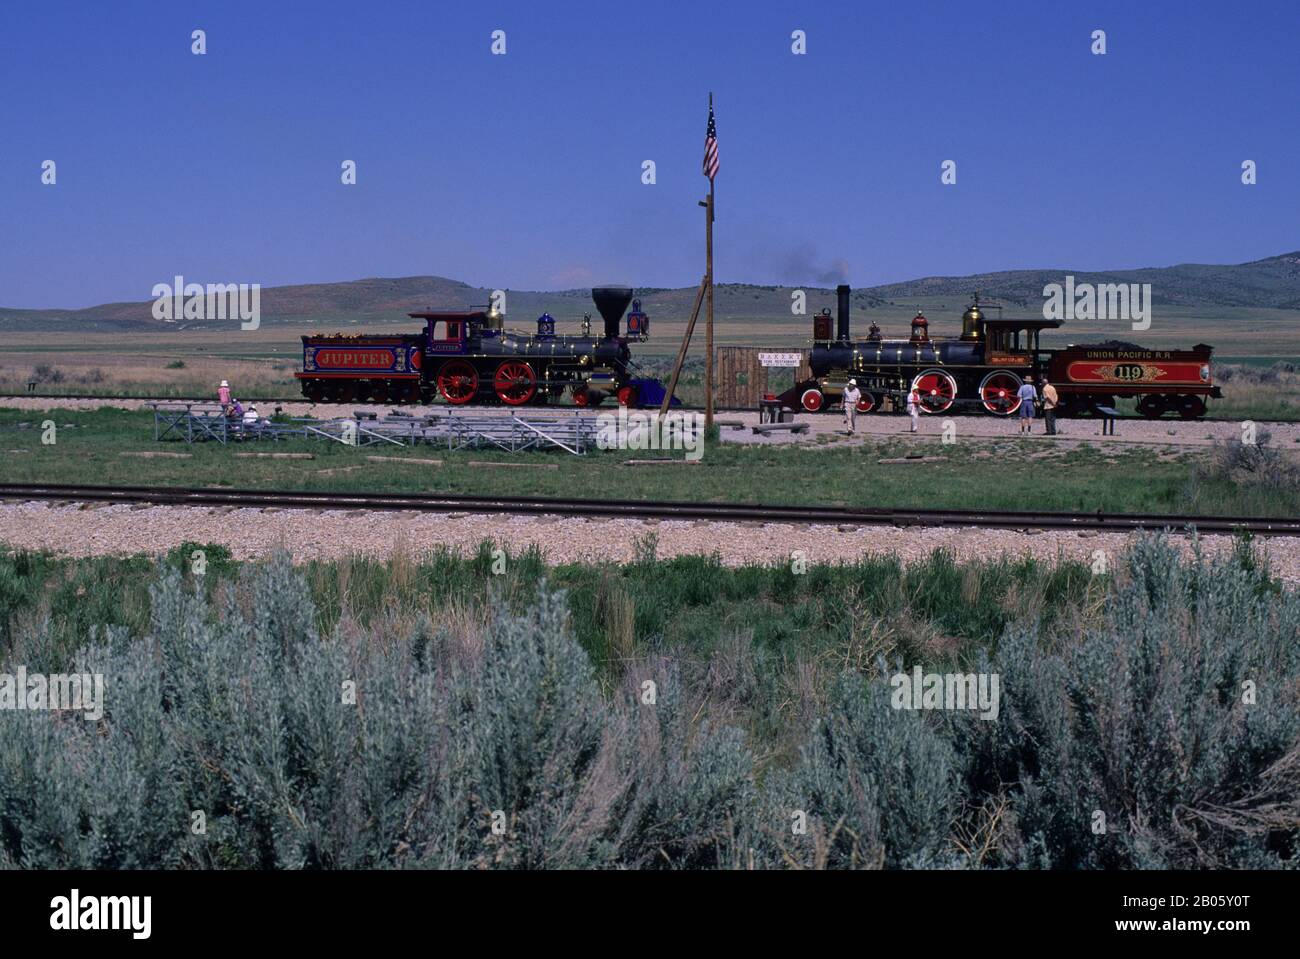 USA, UTAH, PROMONTORY POINT, GOLDEN SPIKE NATIONAL HISTORIC SITE, MEETING PLACE OF RAILROADS Stock Photo